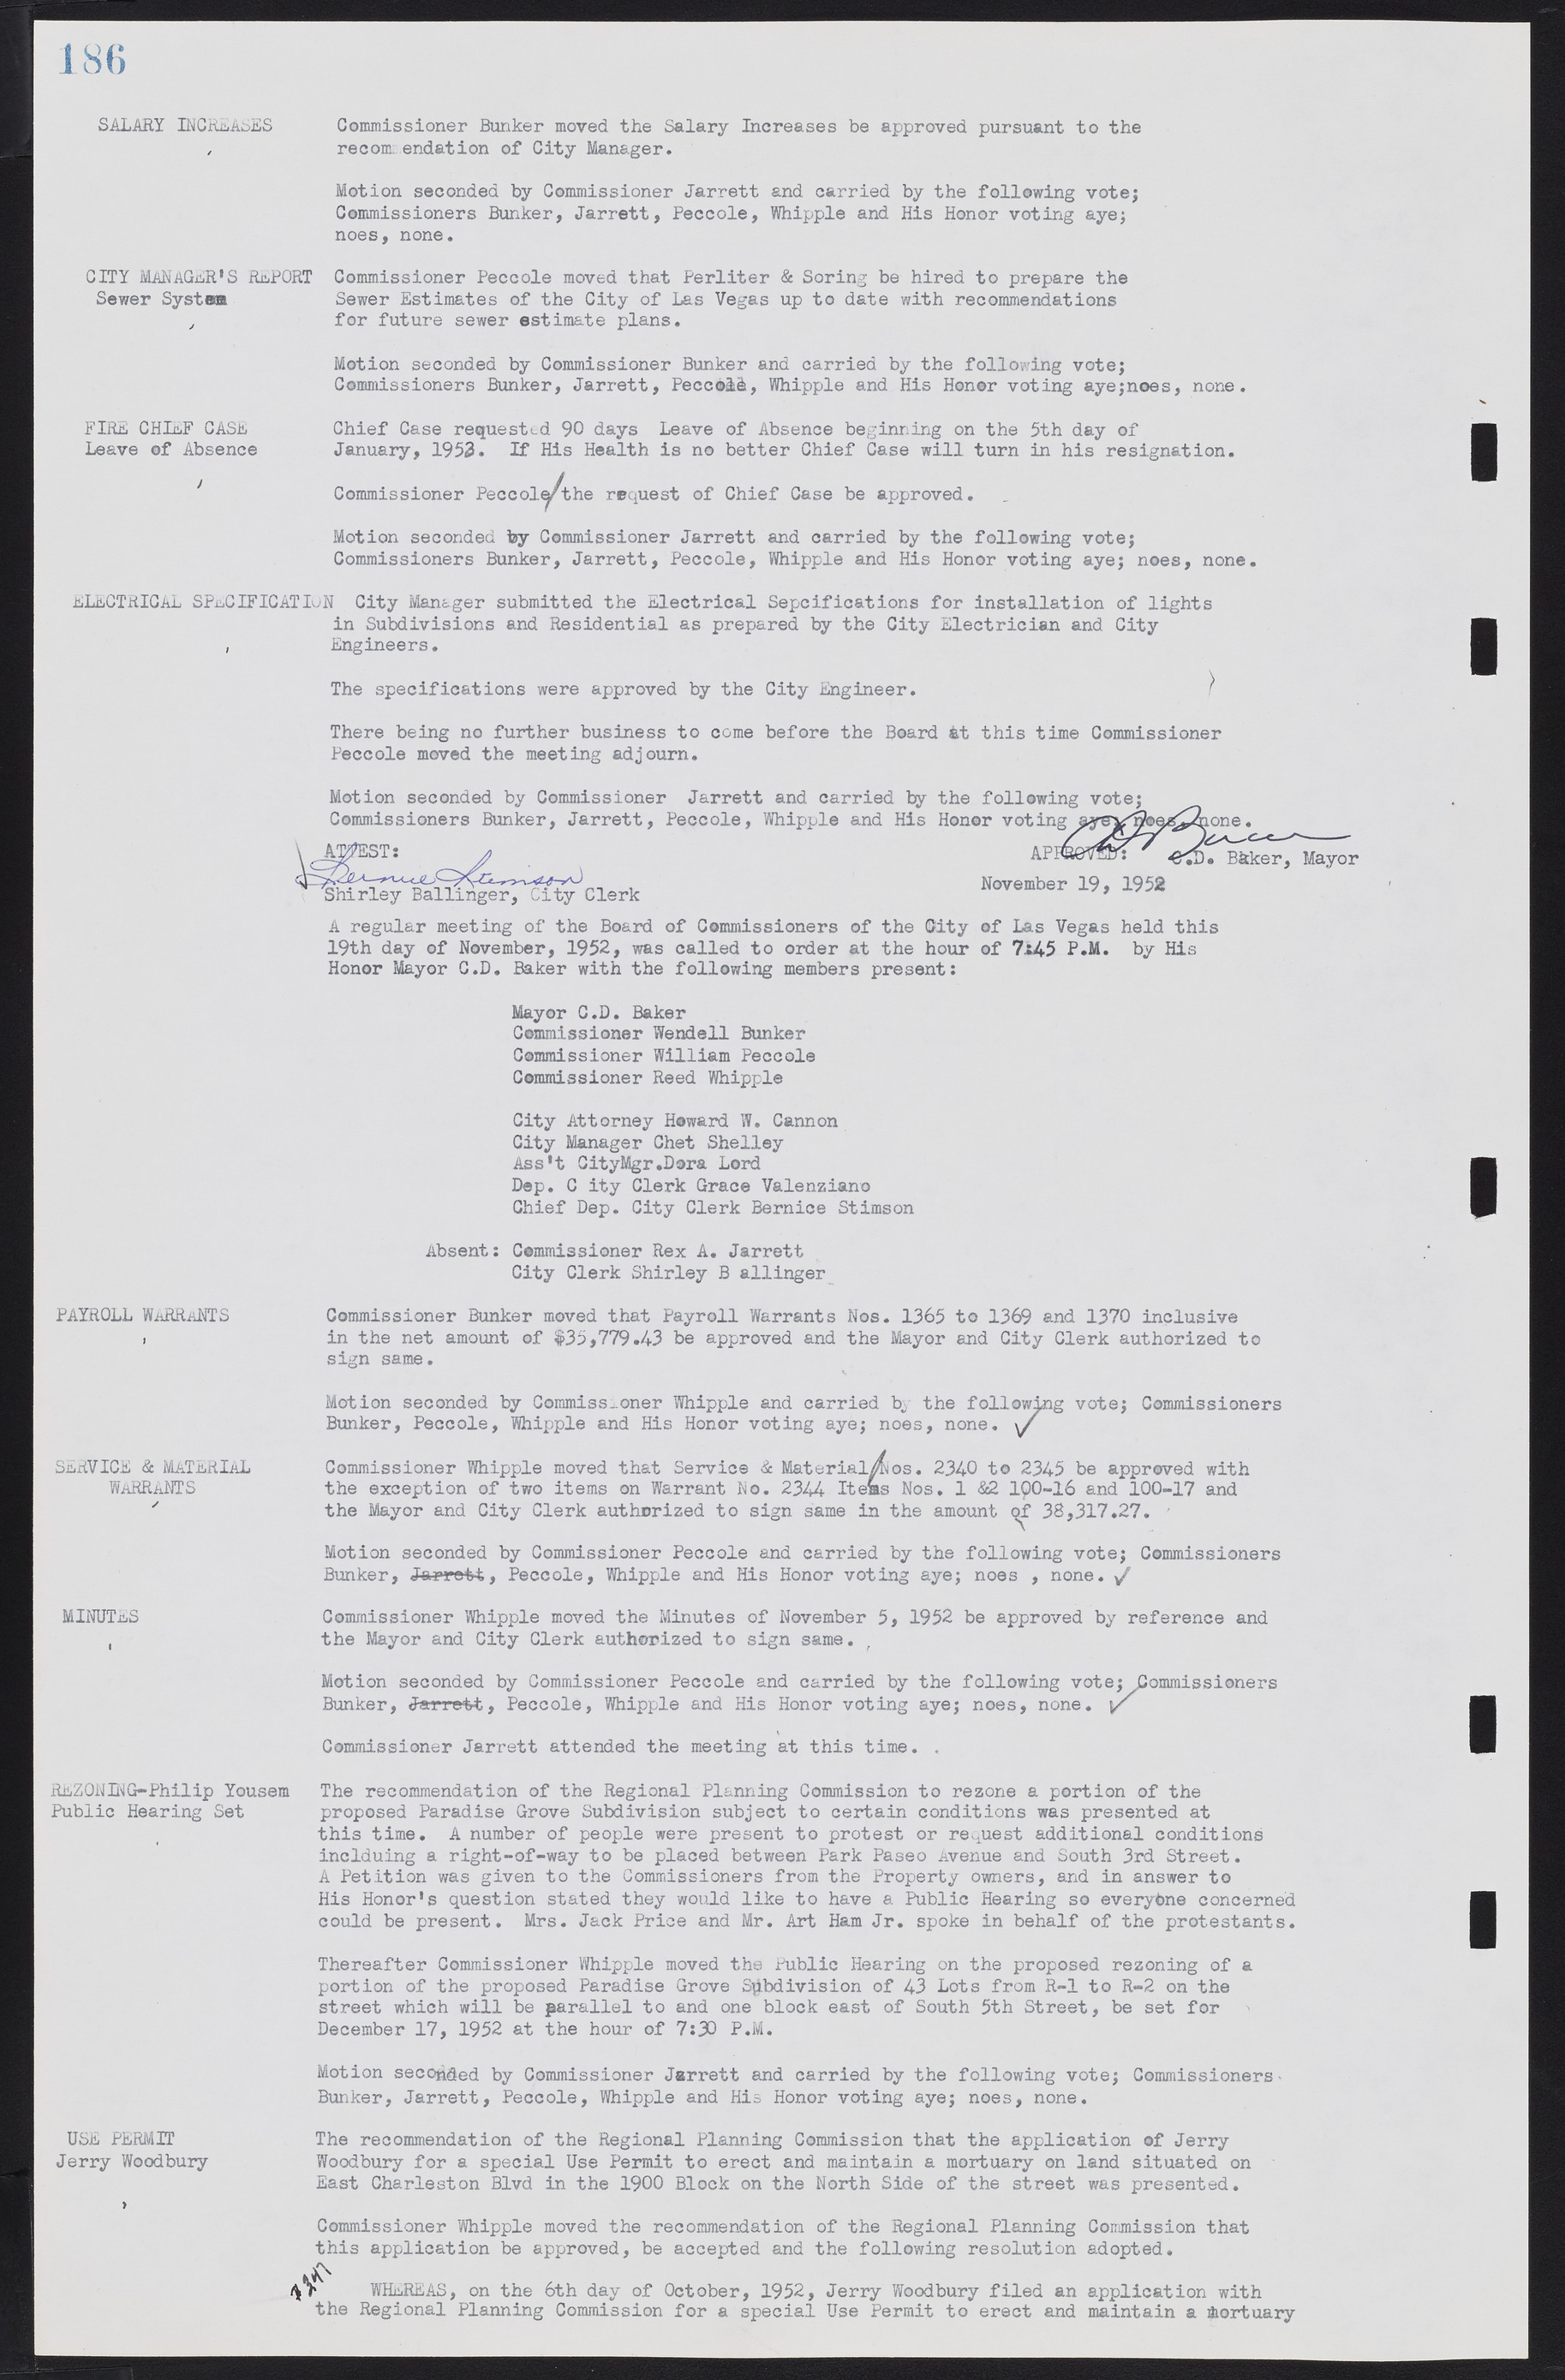 Las Vegas City Commission Minutes, May 26, 1952 to February 17, 1954, lvc000008-200